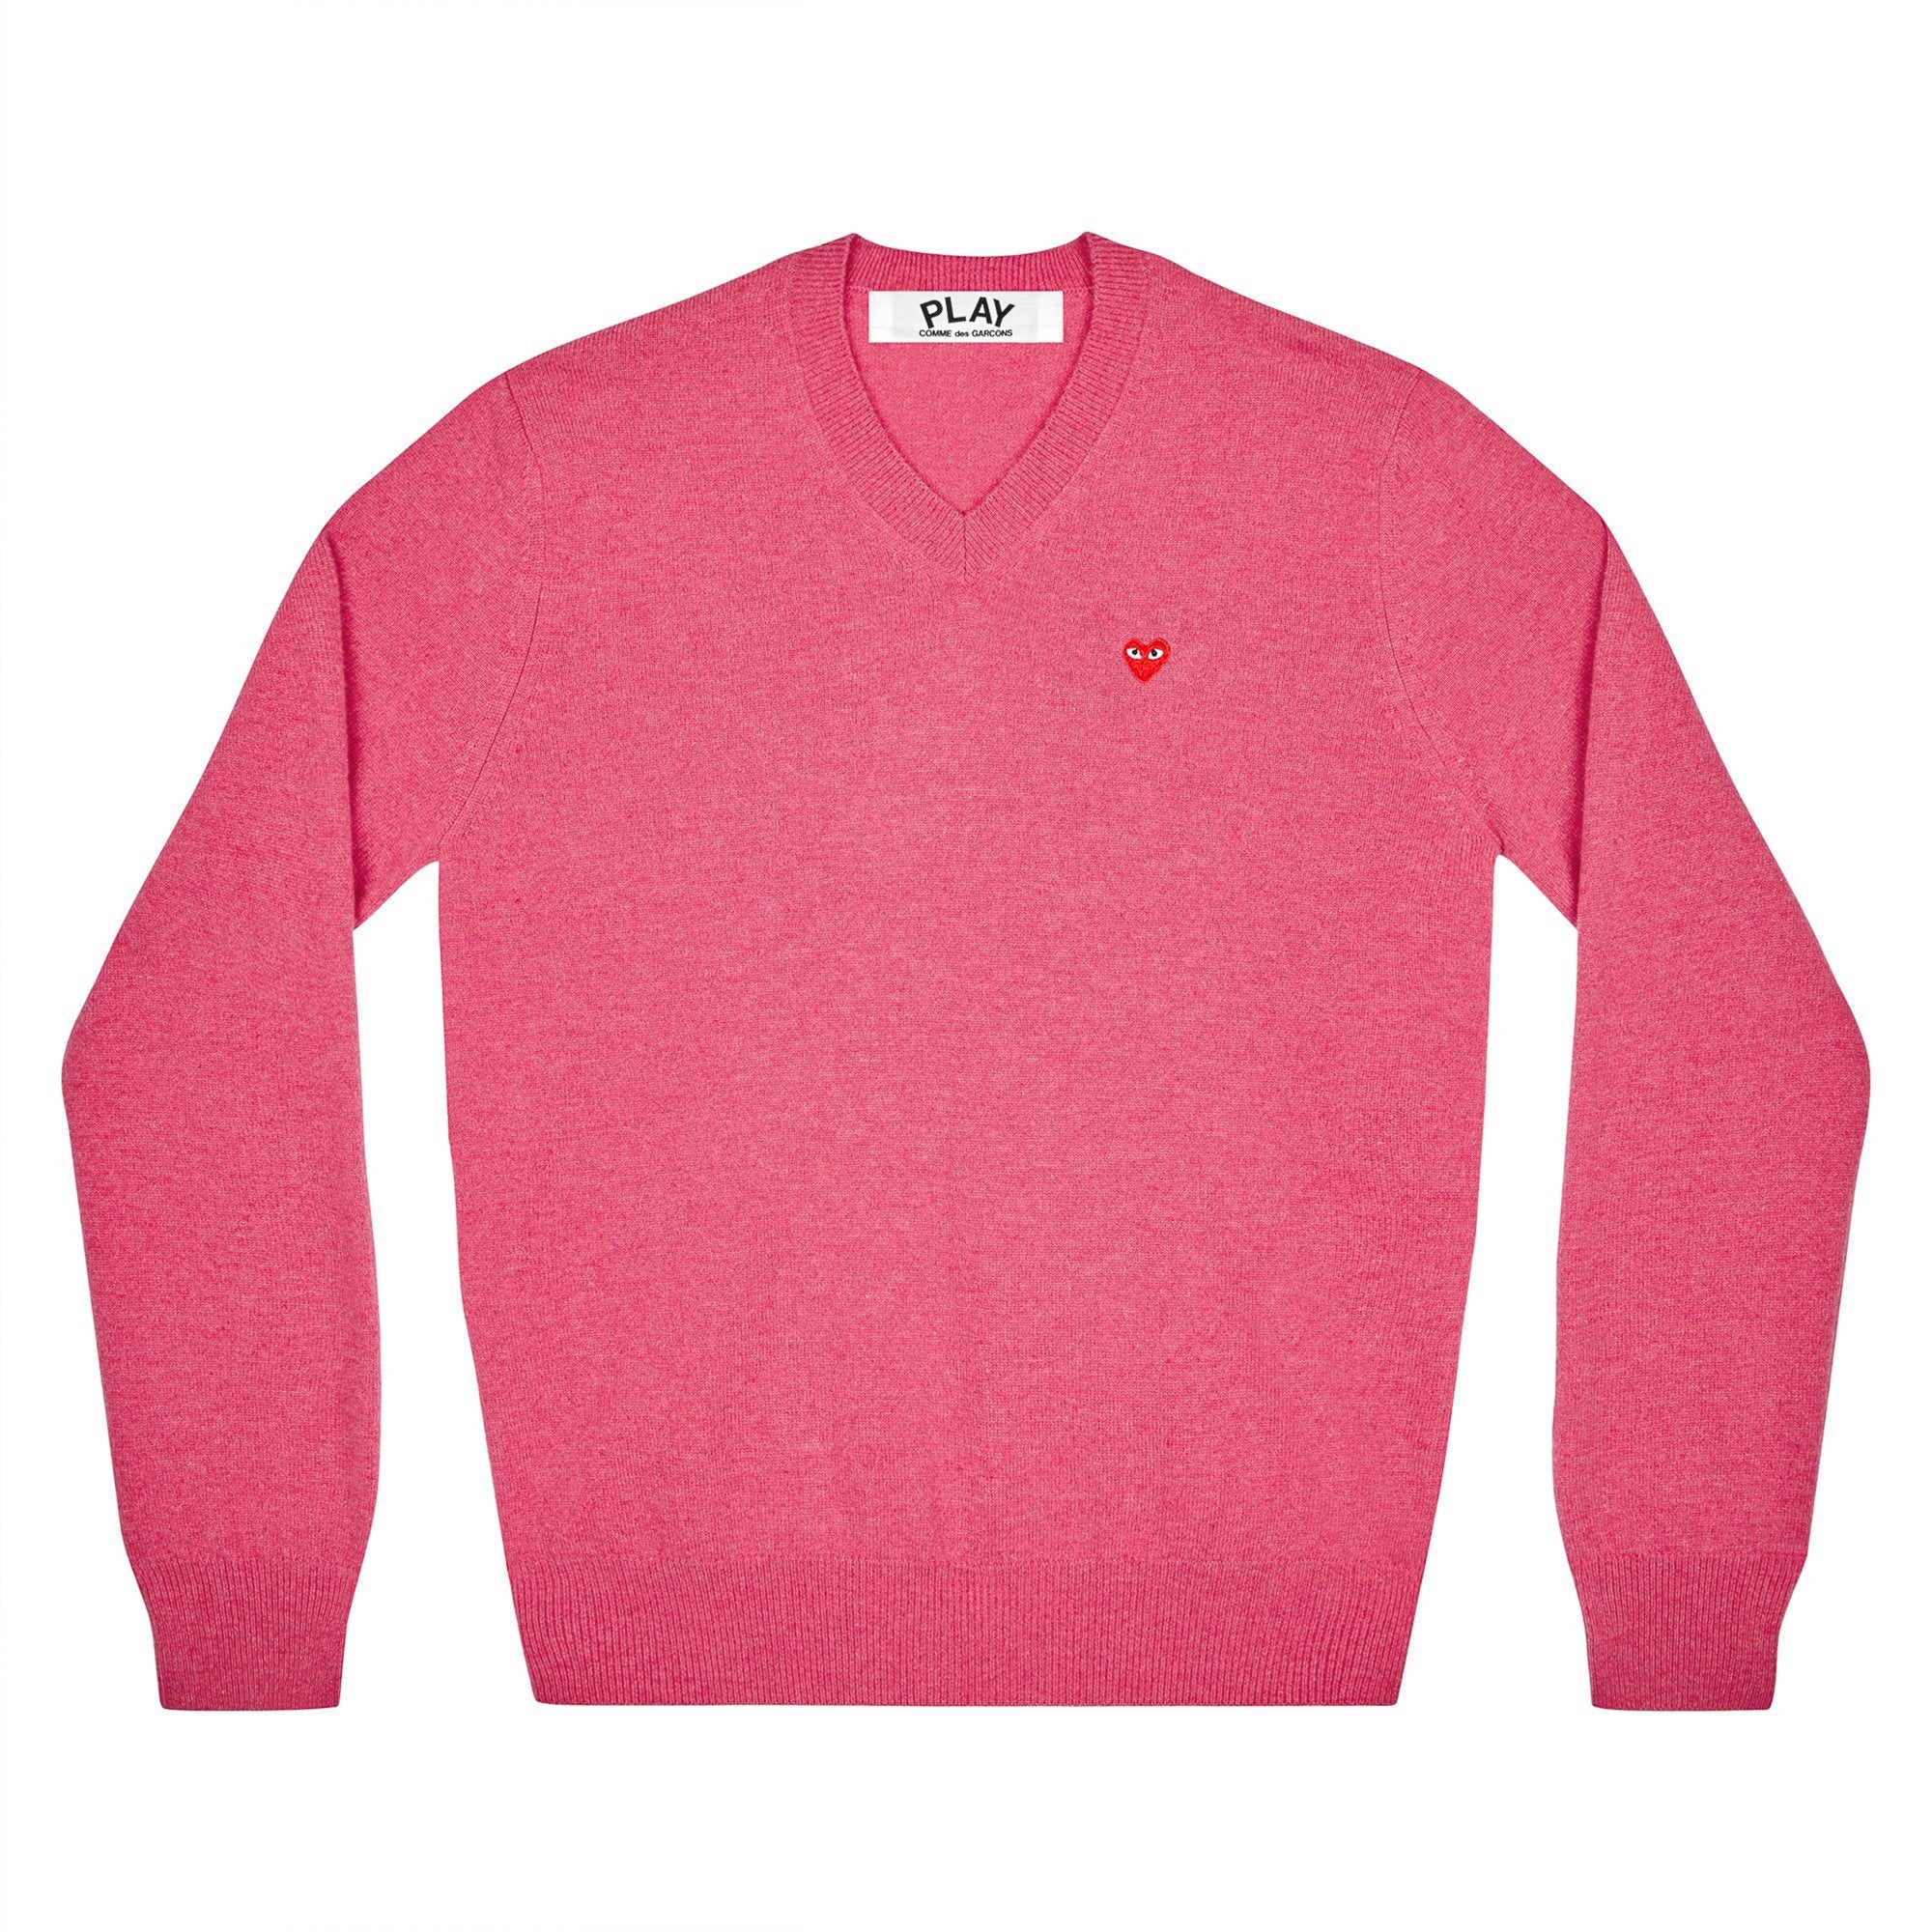 PLAY CDG - V NECK SWEATER WITH SMALL RED HEART - (PINK) view 1